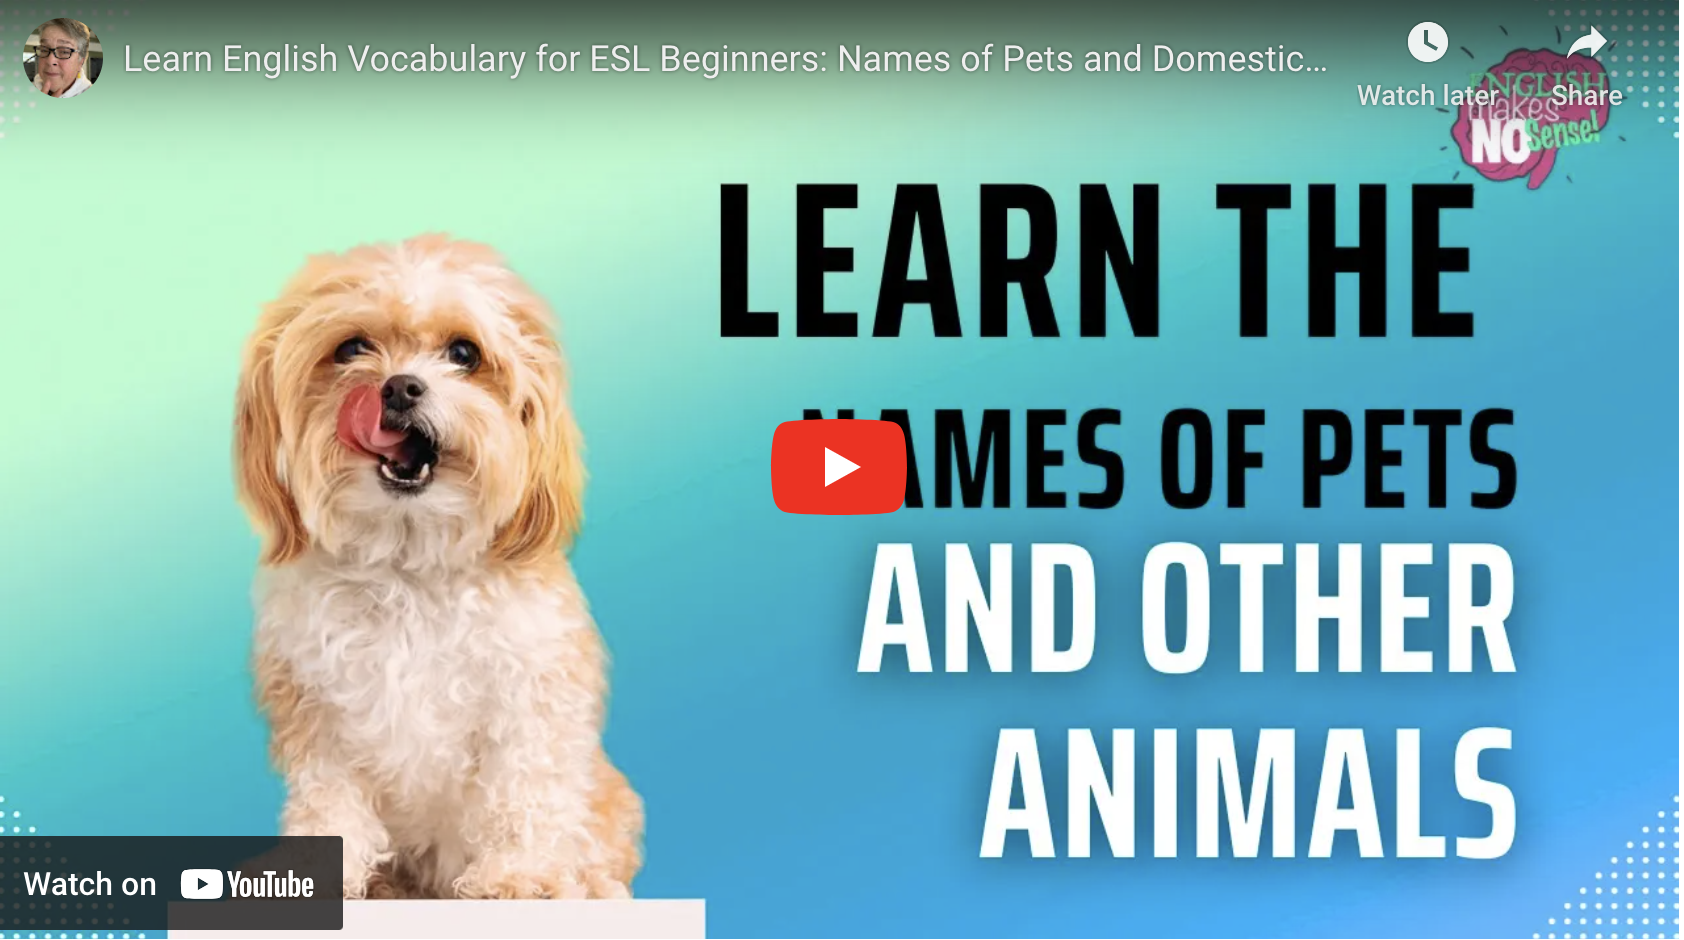 Learn the names of pets and other animals